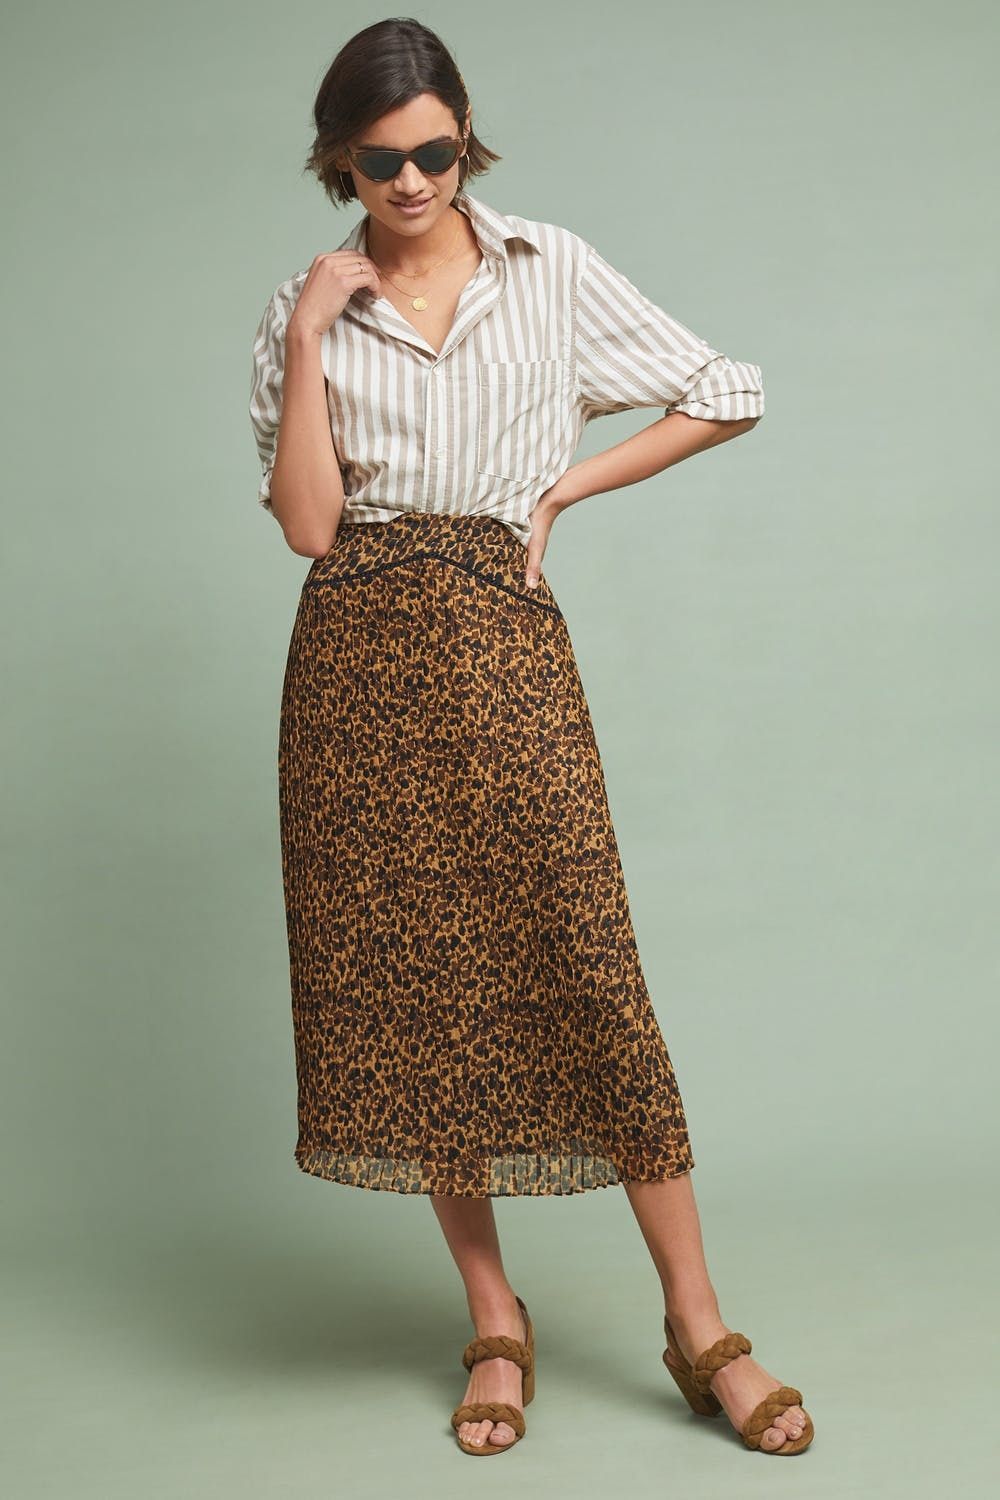 tops to go with leopard print skirt